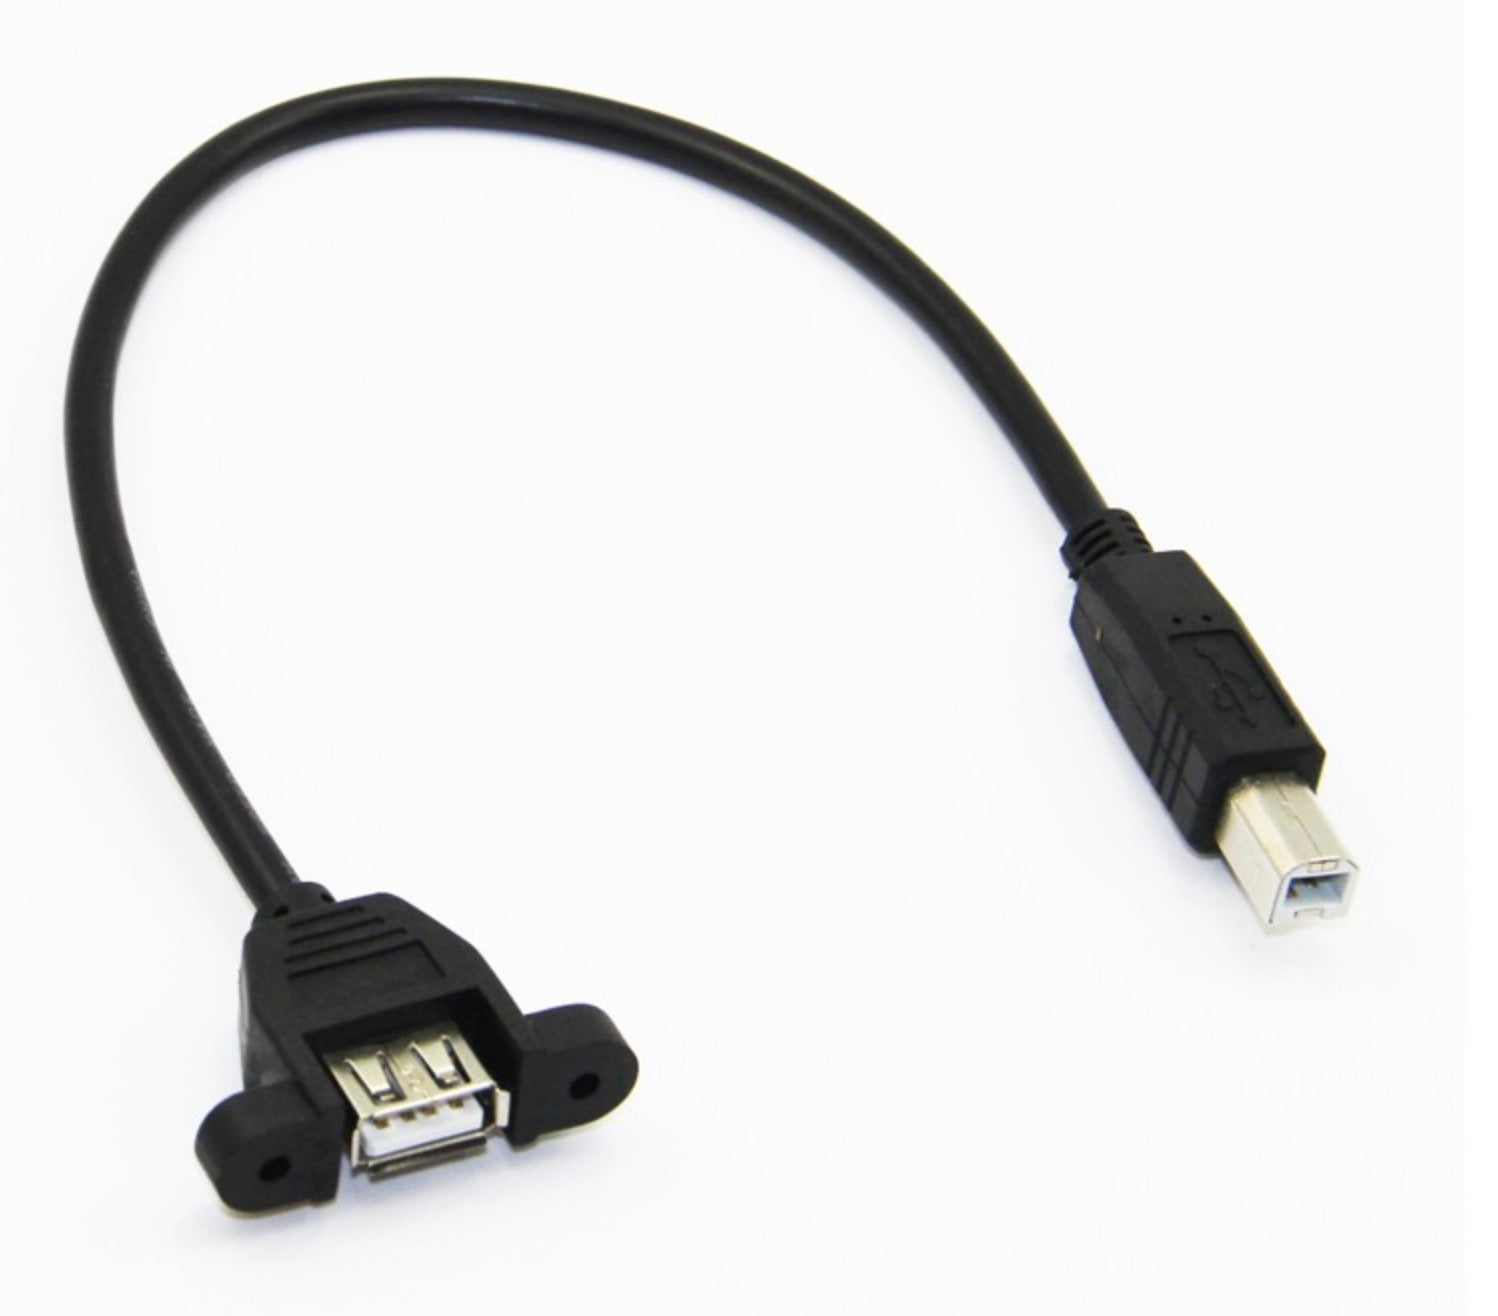 USB-B 2.0 Male to USB-A 2.0 Female Panel Mount Extension Cable